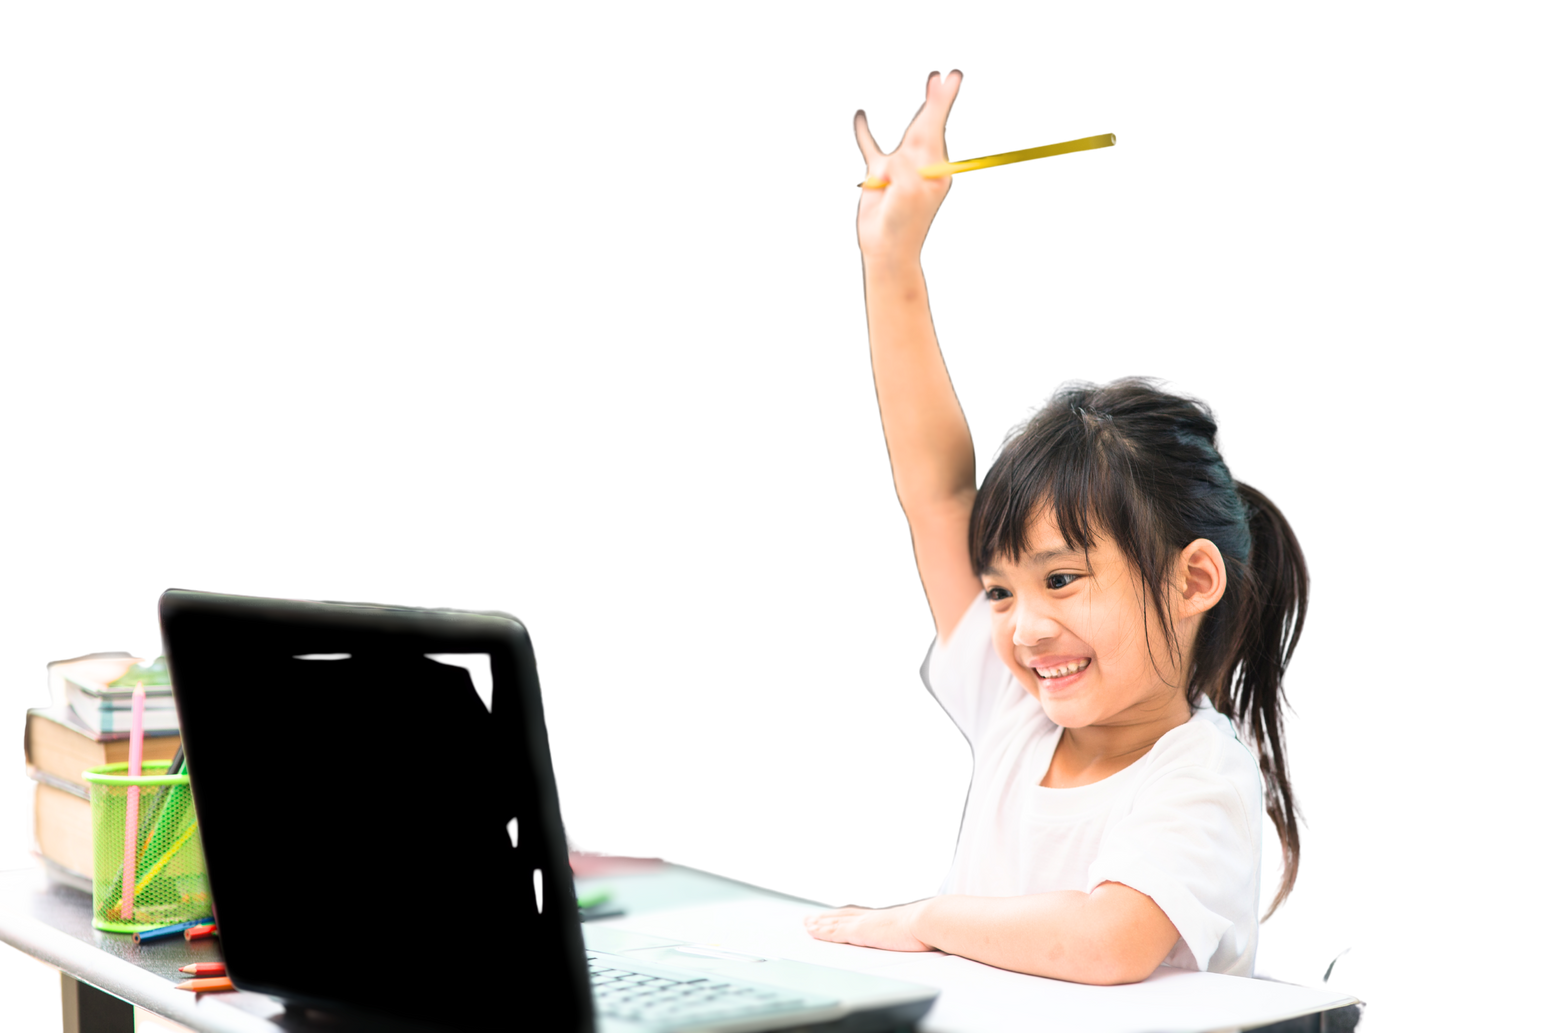 Asian Girl Student Online Learning Class Study Online with Lapto